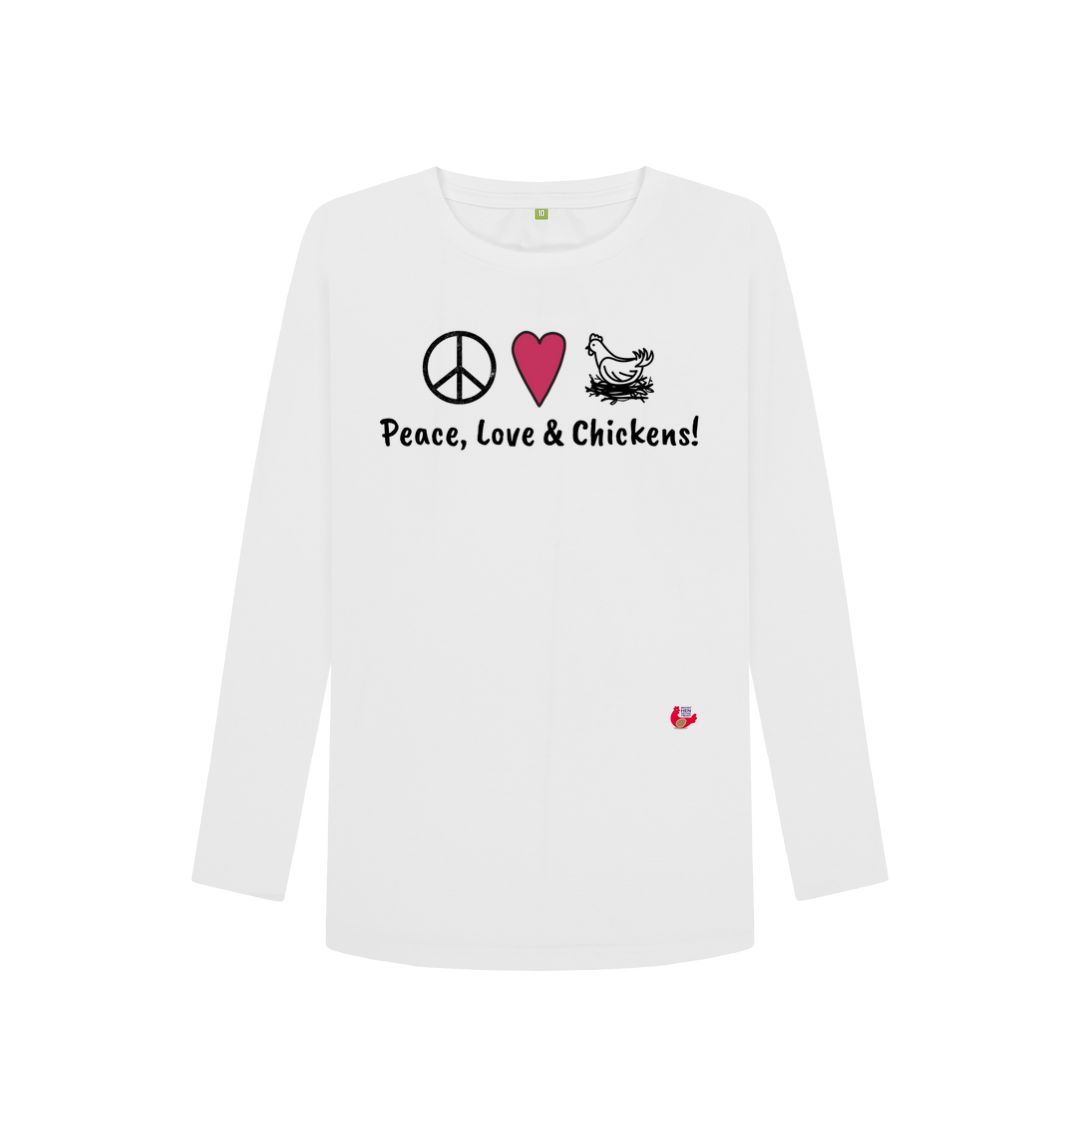 White Women's Long Sleeve T-Shirt - Peace, Love & Chickens - Large Logo